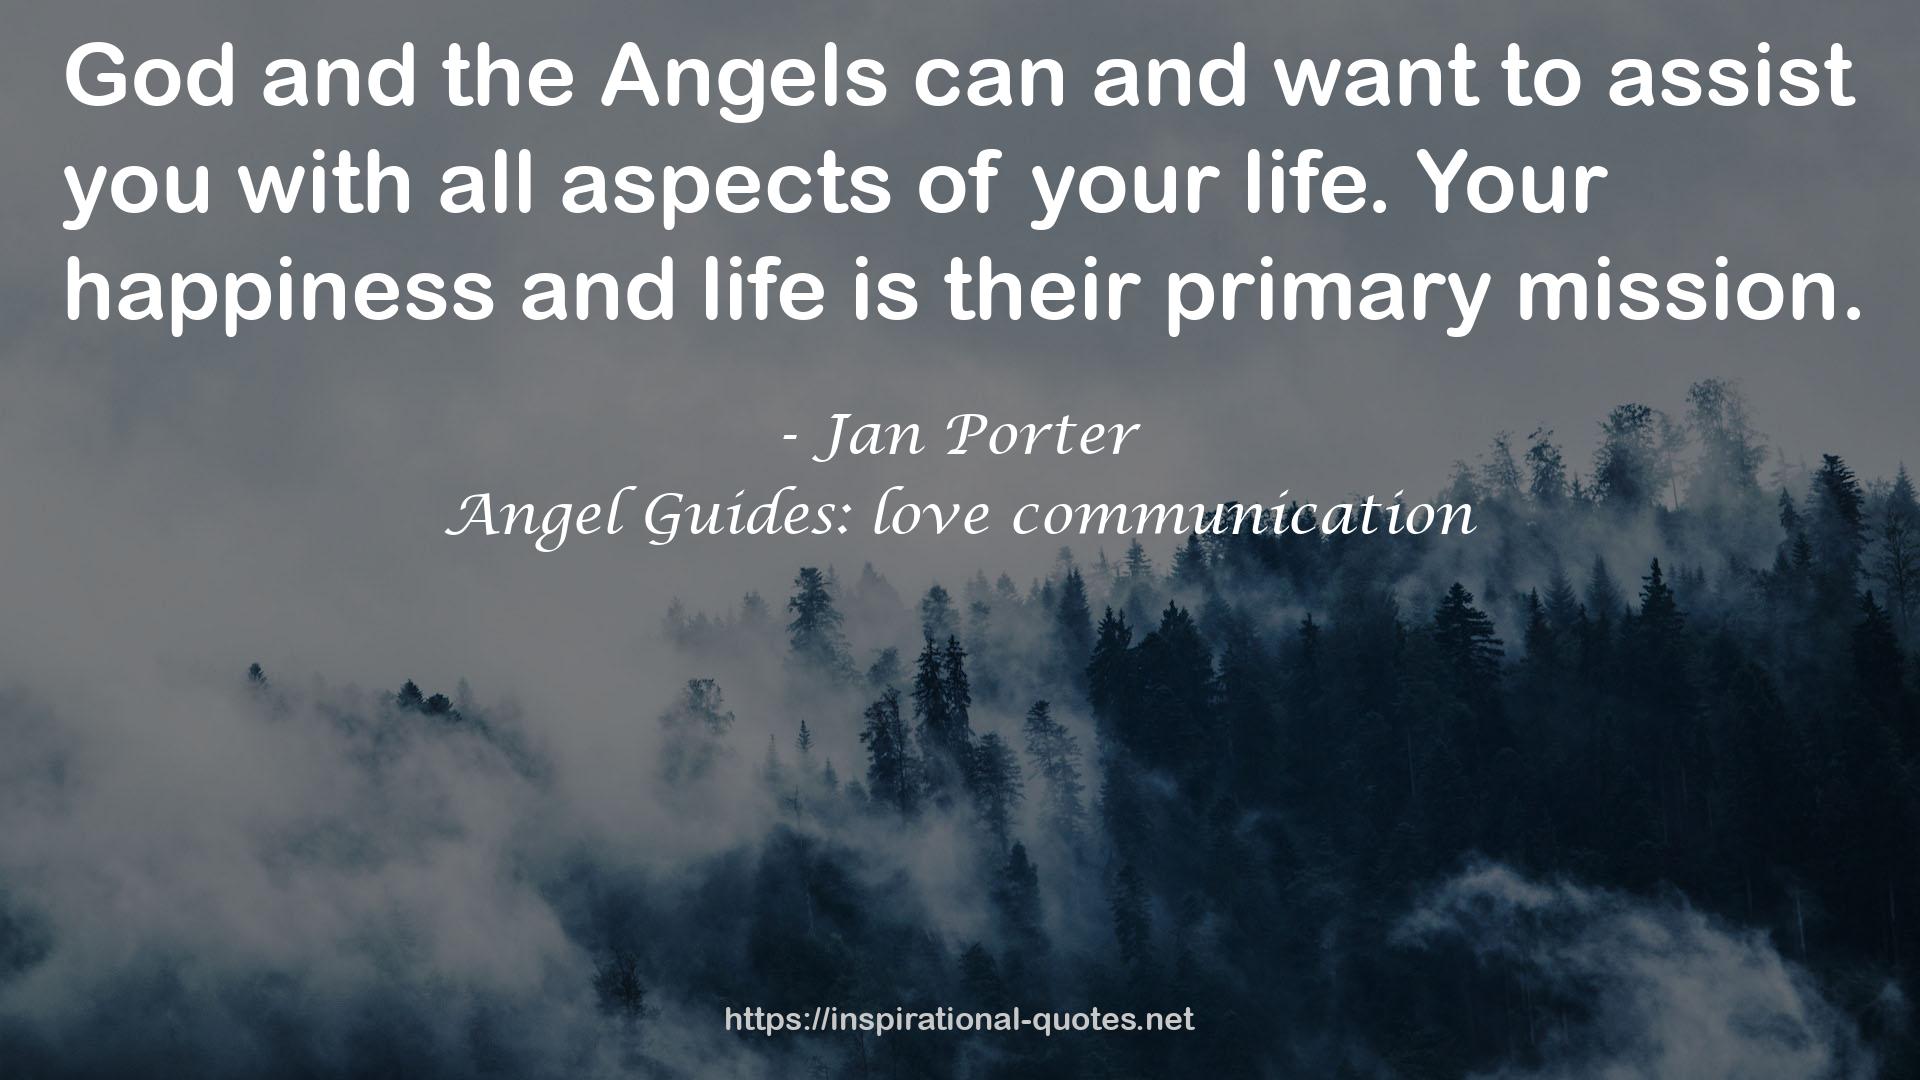 Angel Guides: love communication QUOTES